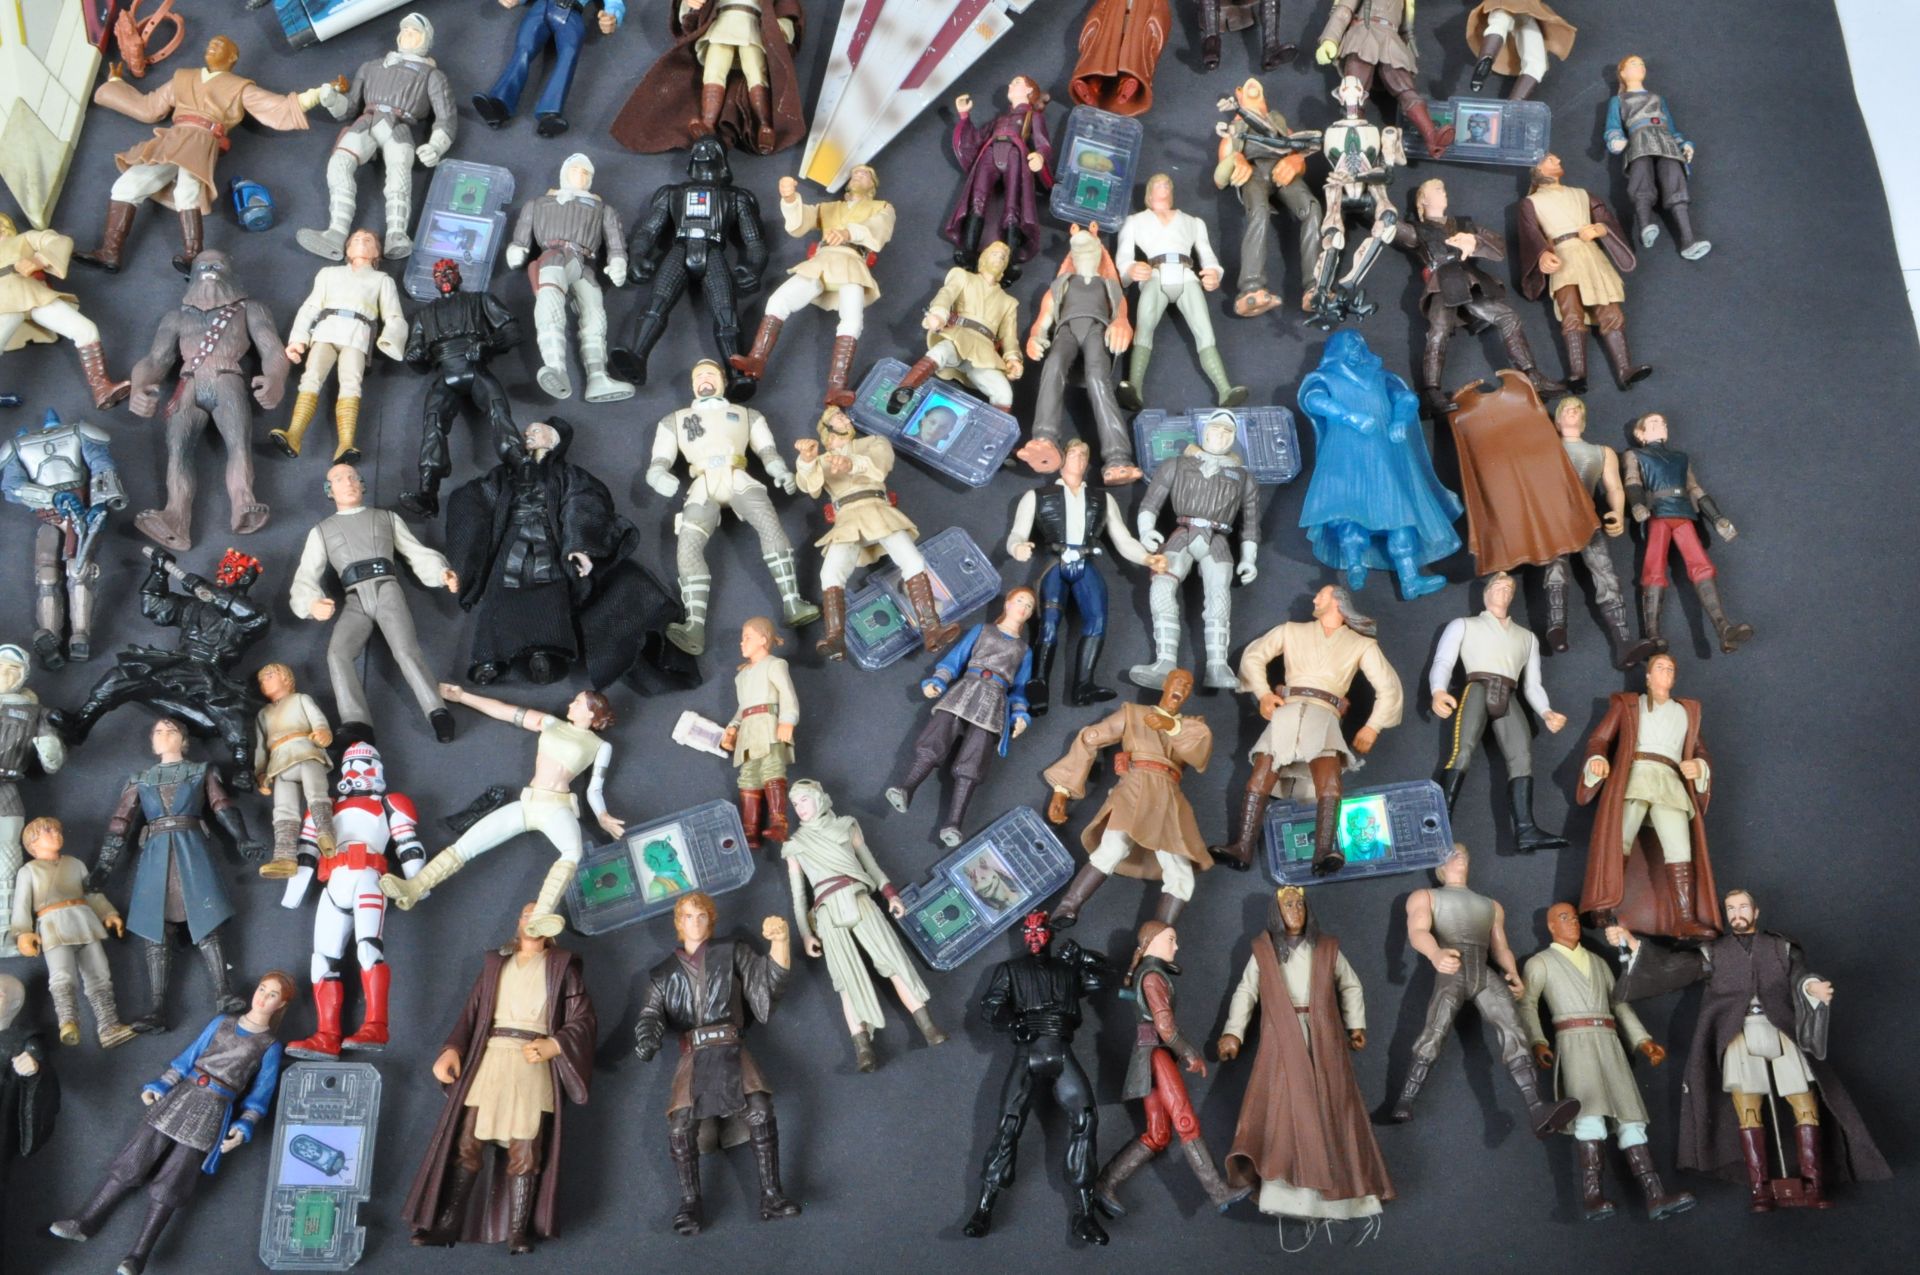 STAR WARS - LARGE COLLECTION KENNER / HASBRO CLONE WARS & OTHER FIGURES - Image 3 of 10